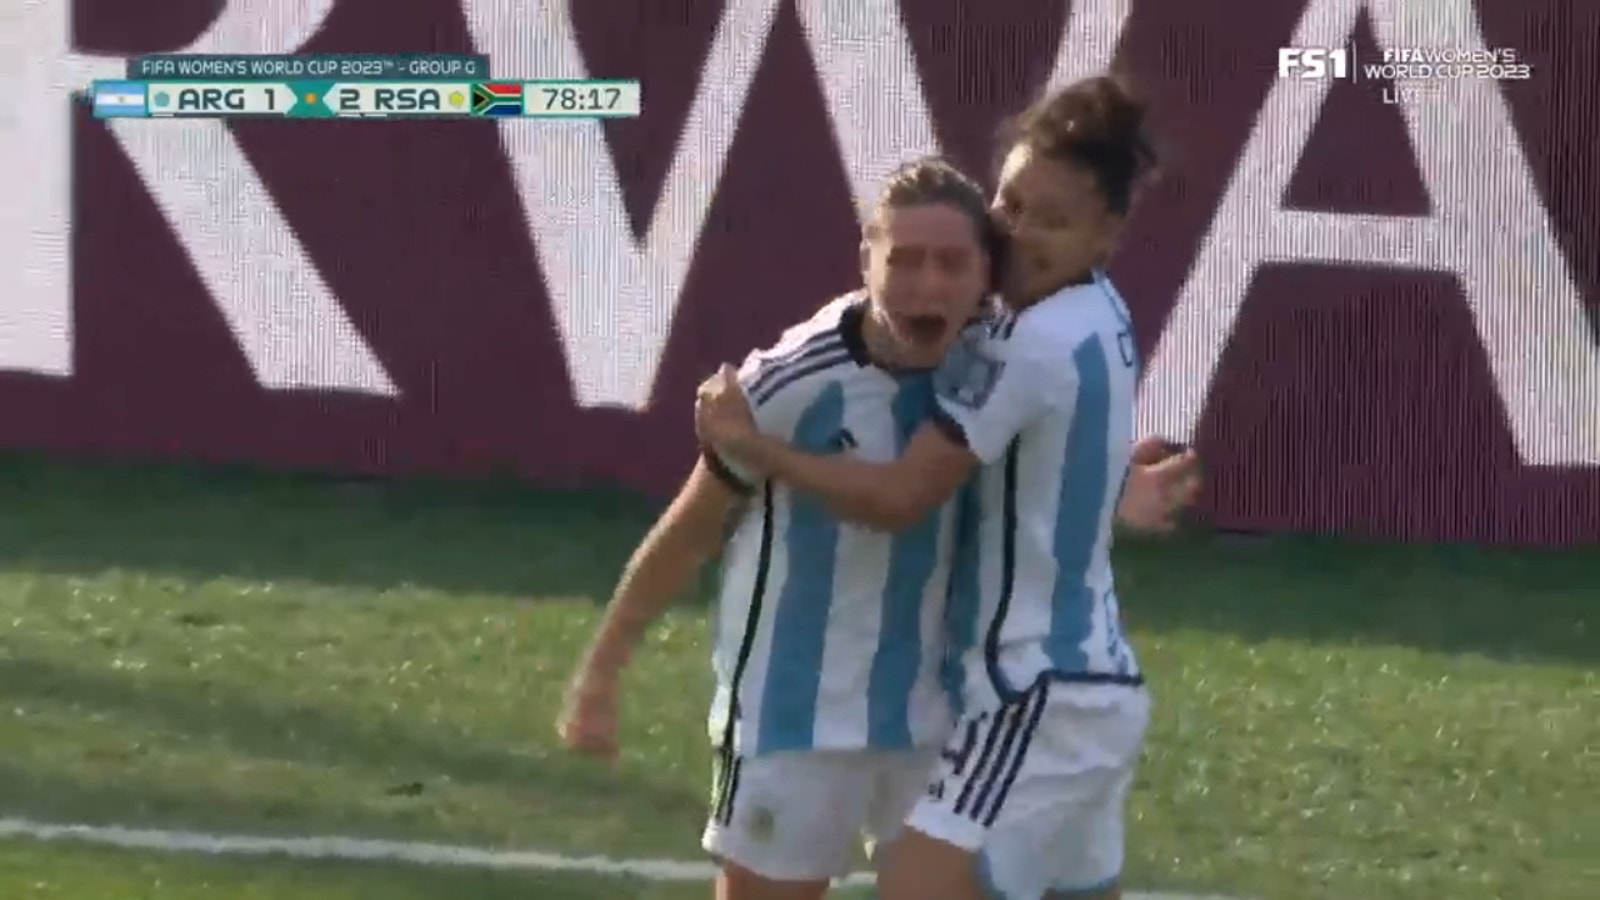 Argentina's Sophia Braun and Romina Núñez score two goals in the second half to pull off a 2-2 draw vs. South Africa